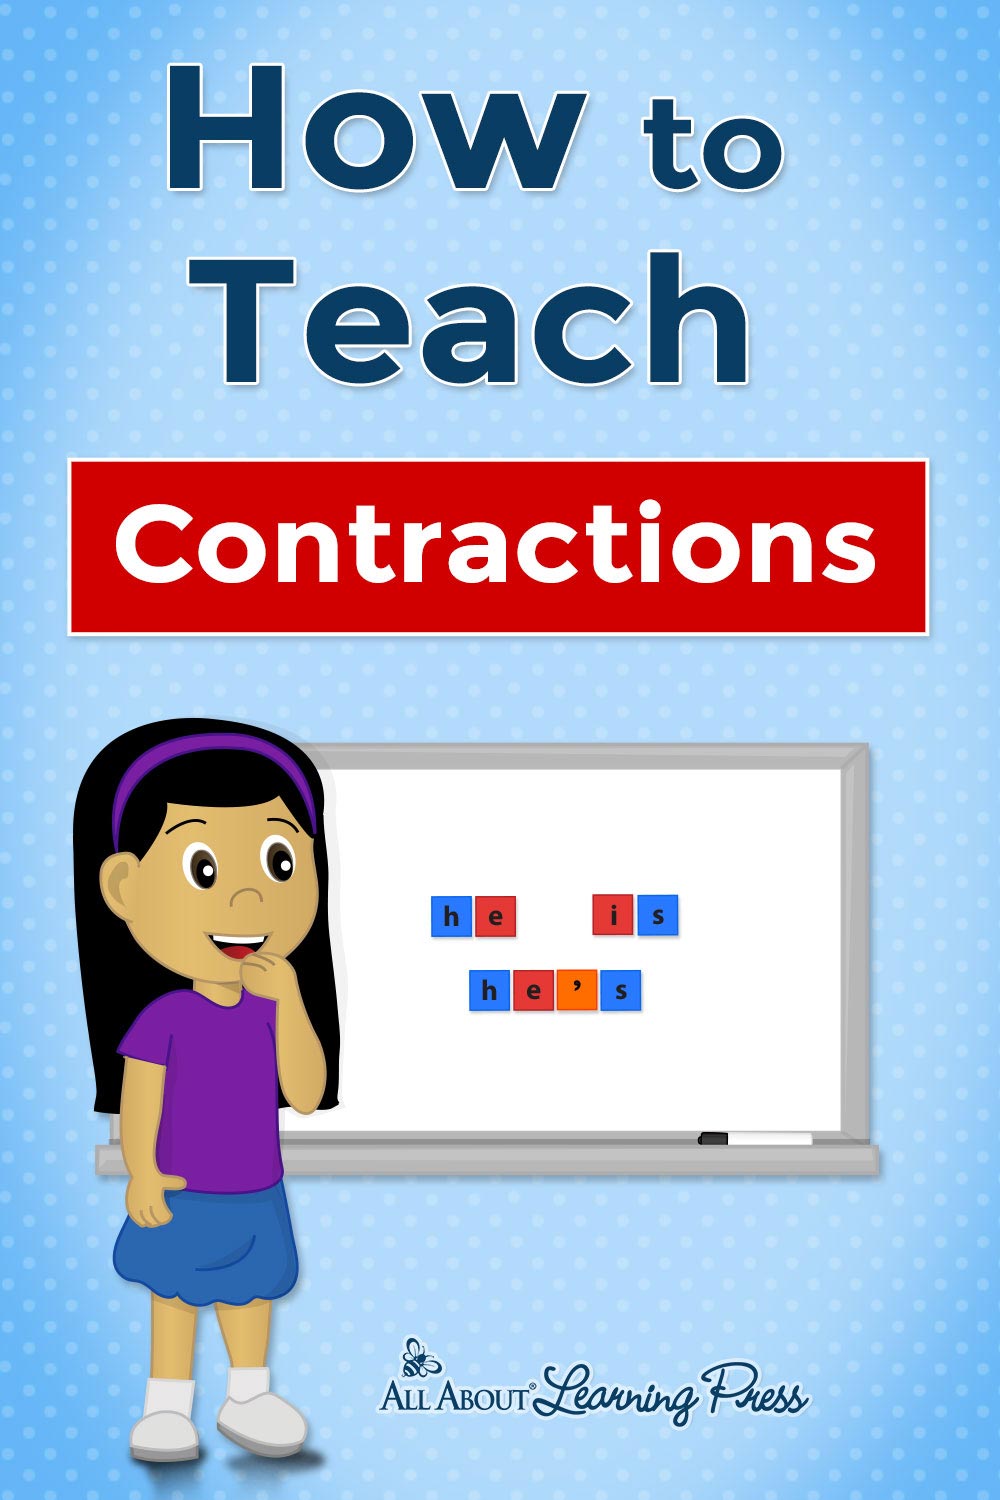 Teacher Made Literacy Center Educational Learning Resource Game Contractions